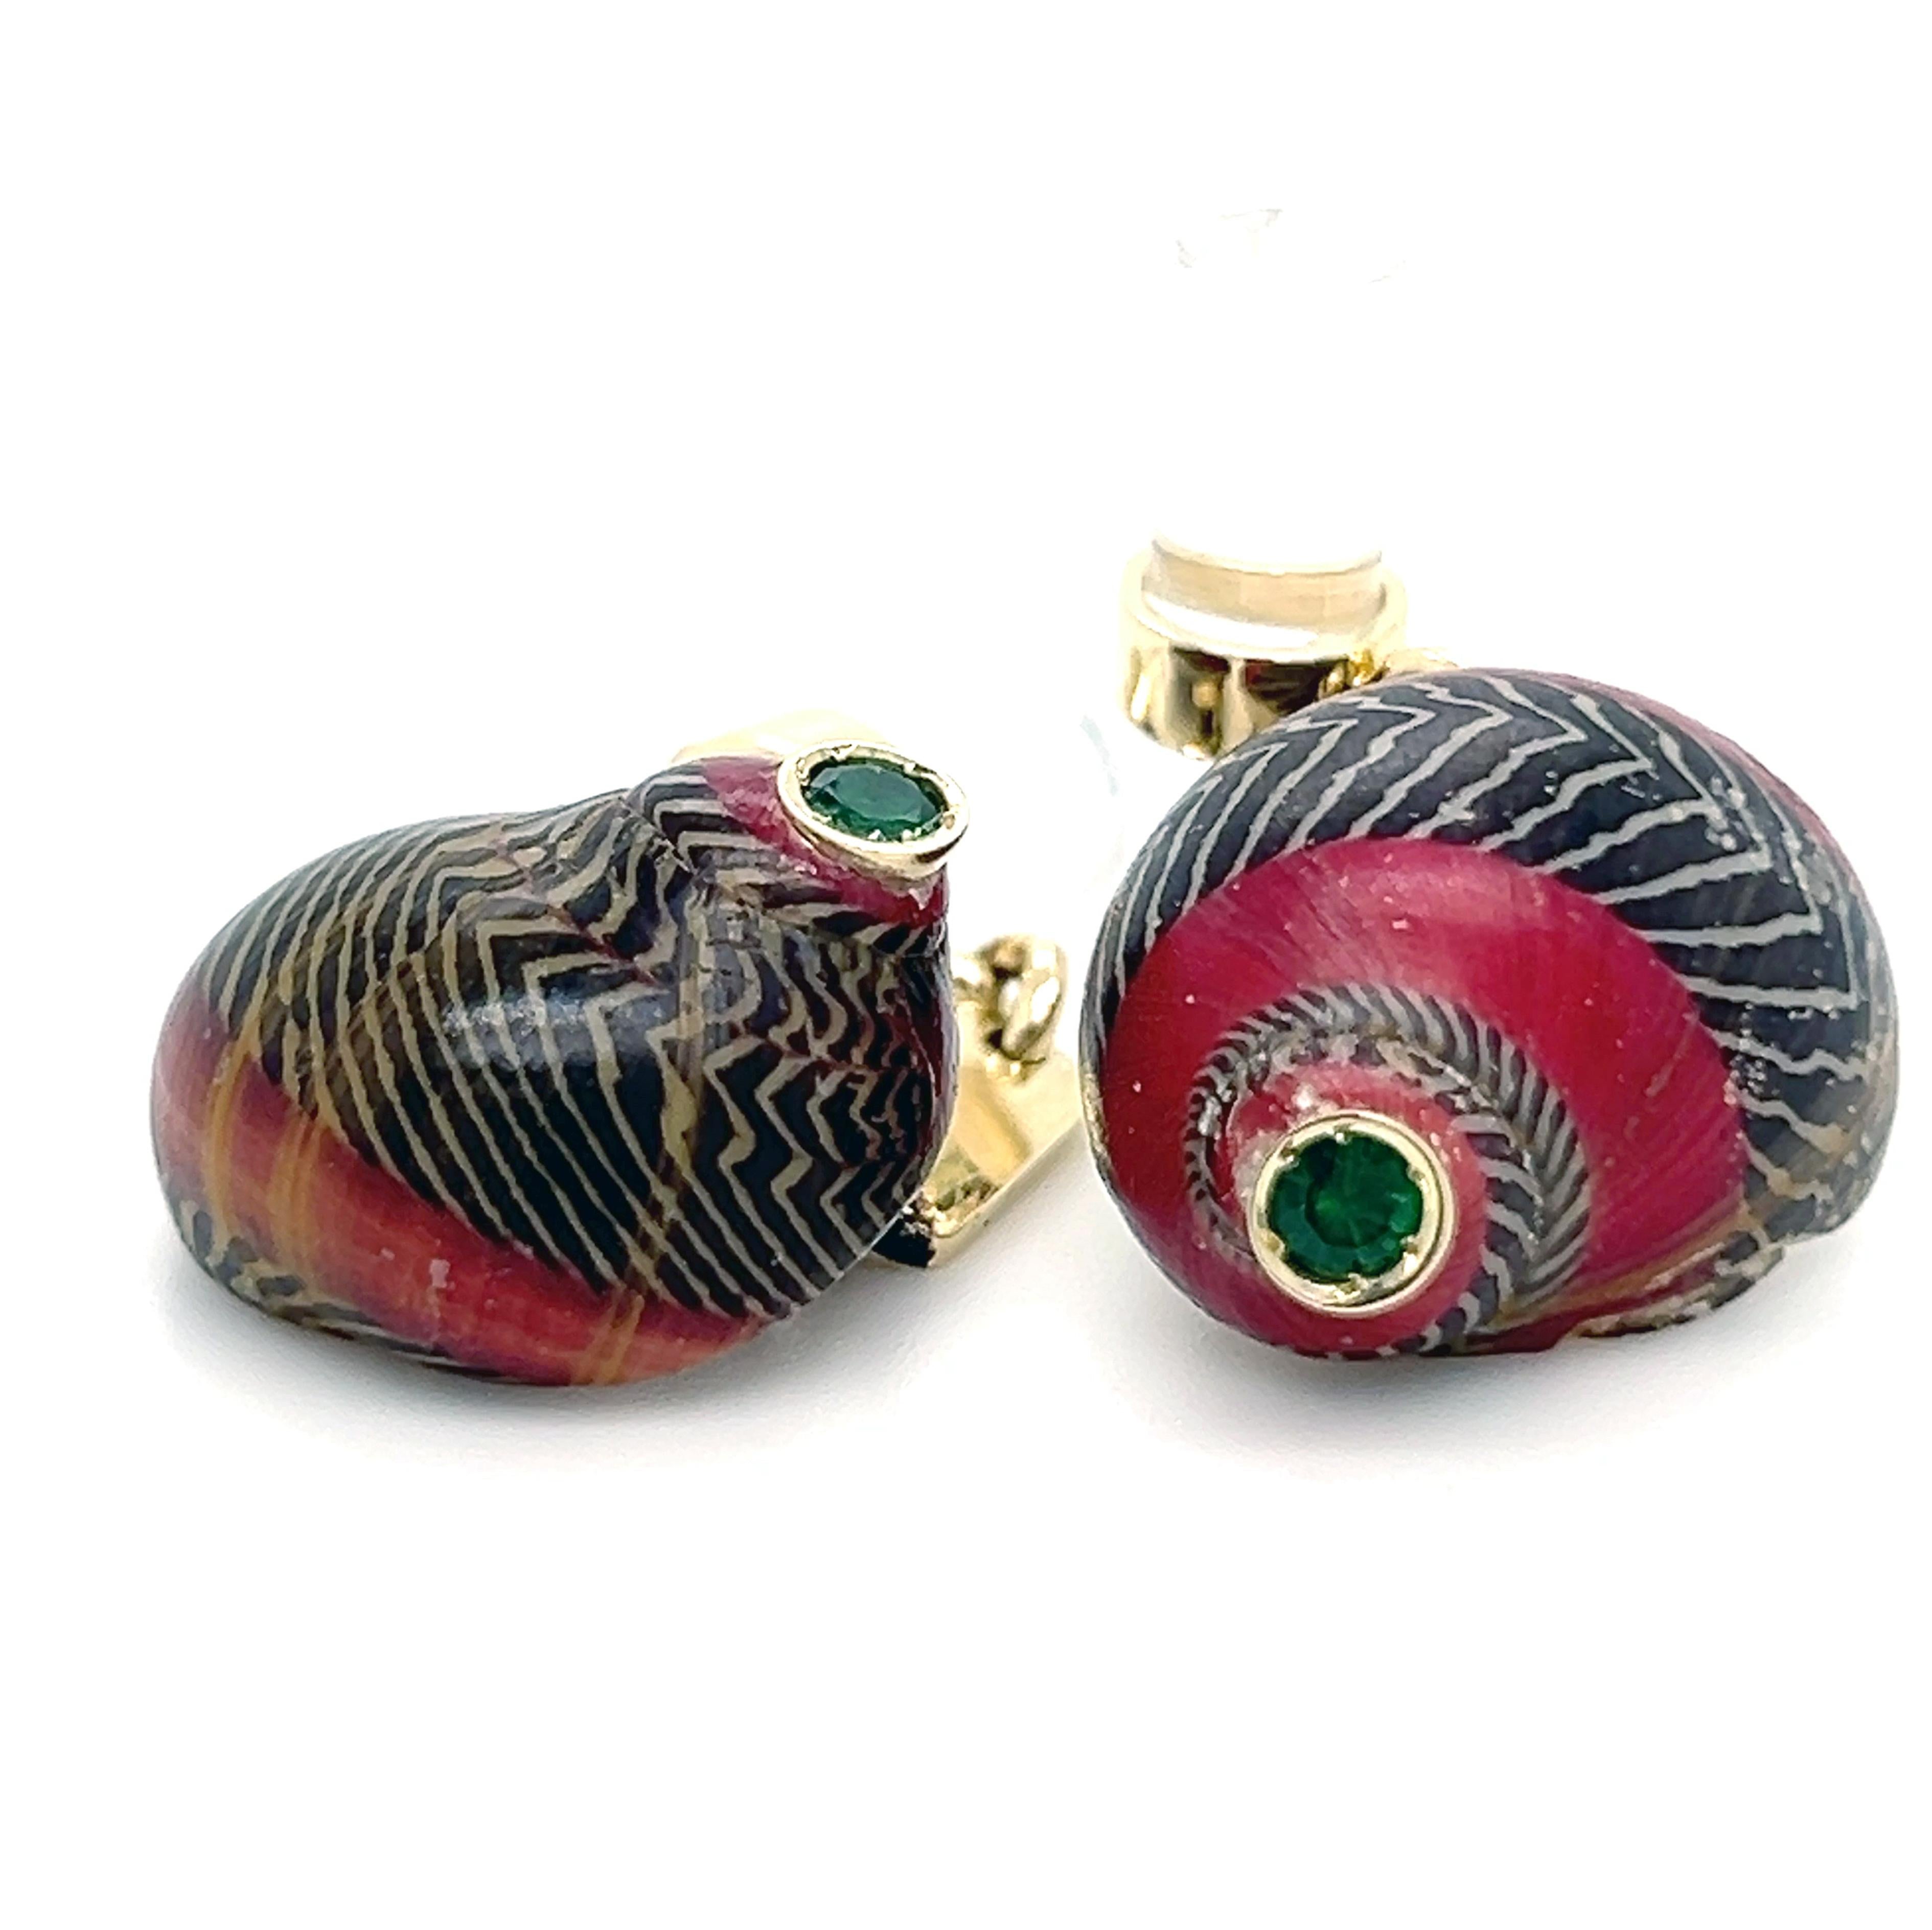 Unique and one-of-a-kind pair of cufflinks featuring a top quality Emerald Brilliant Cut in a Red Black and White Seashell shaped reconstitued Mother-of-Pearl Hand Enameled Back , Yellow Gold Setting. A chic hand inlaid natural Transparent Rock